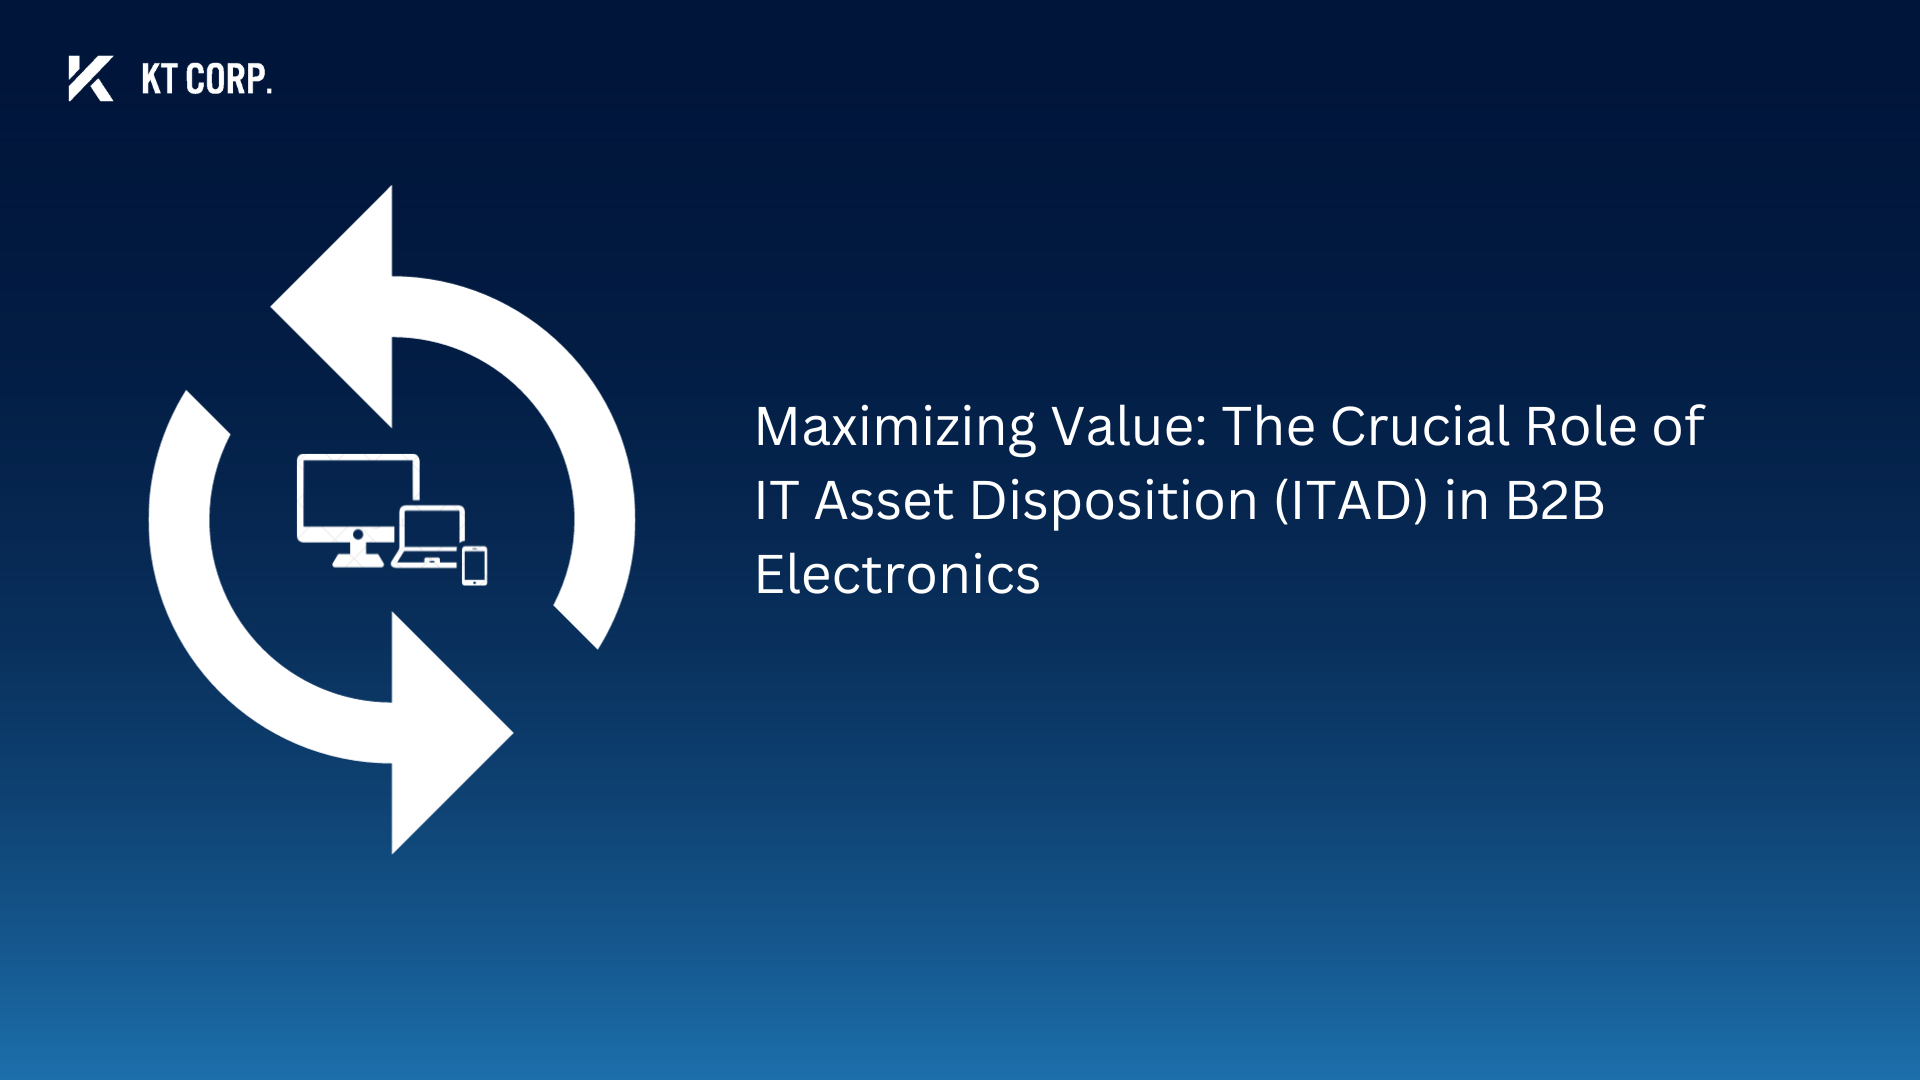 Maximizing Value The Crucial Role of IT Asset Disposition (ITAD) in B2B Electronics KT Corp 